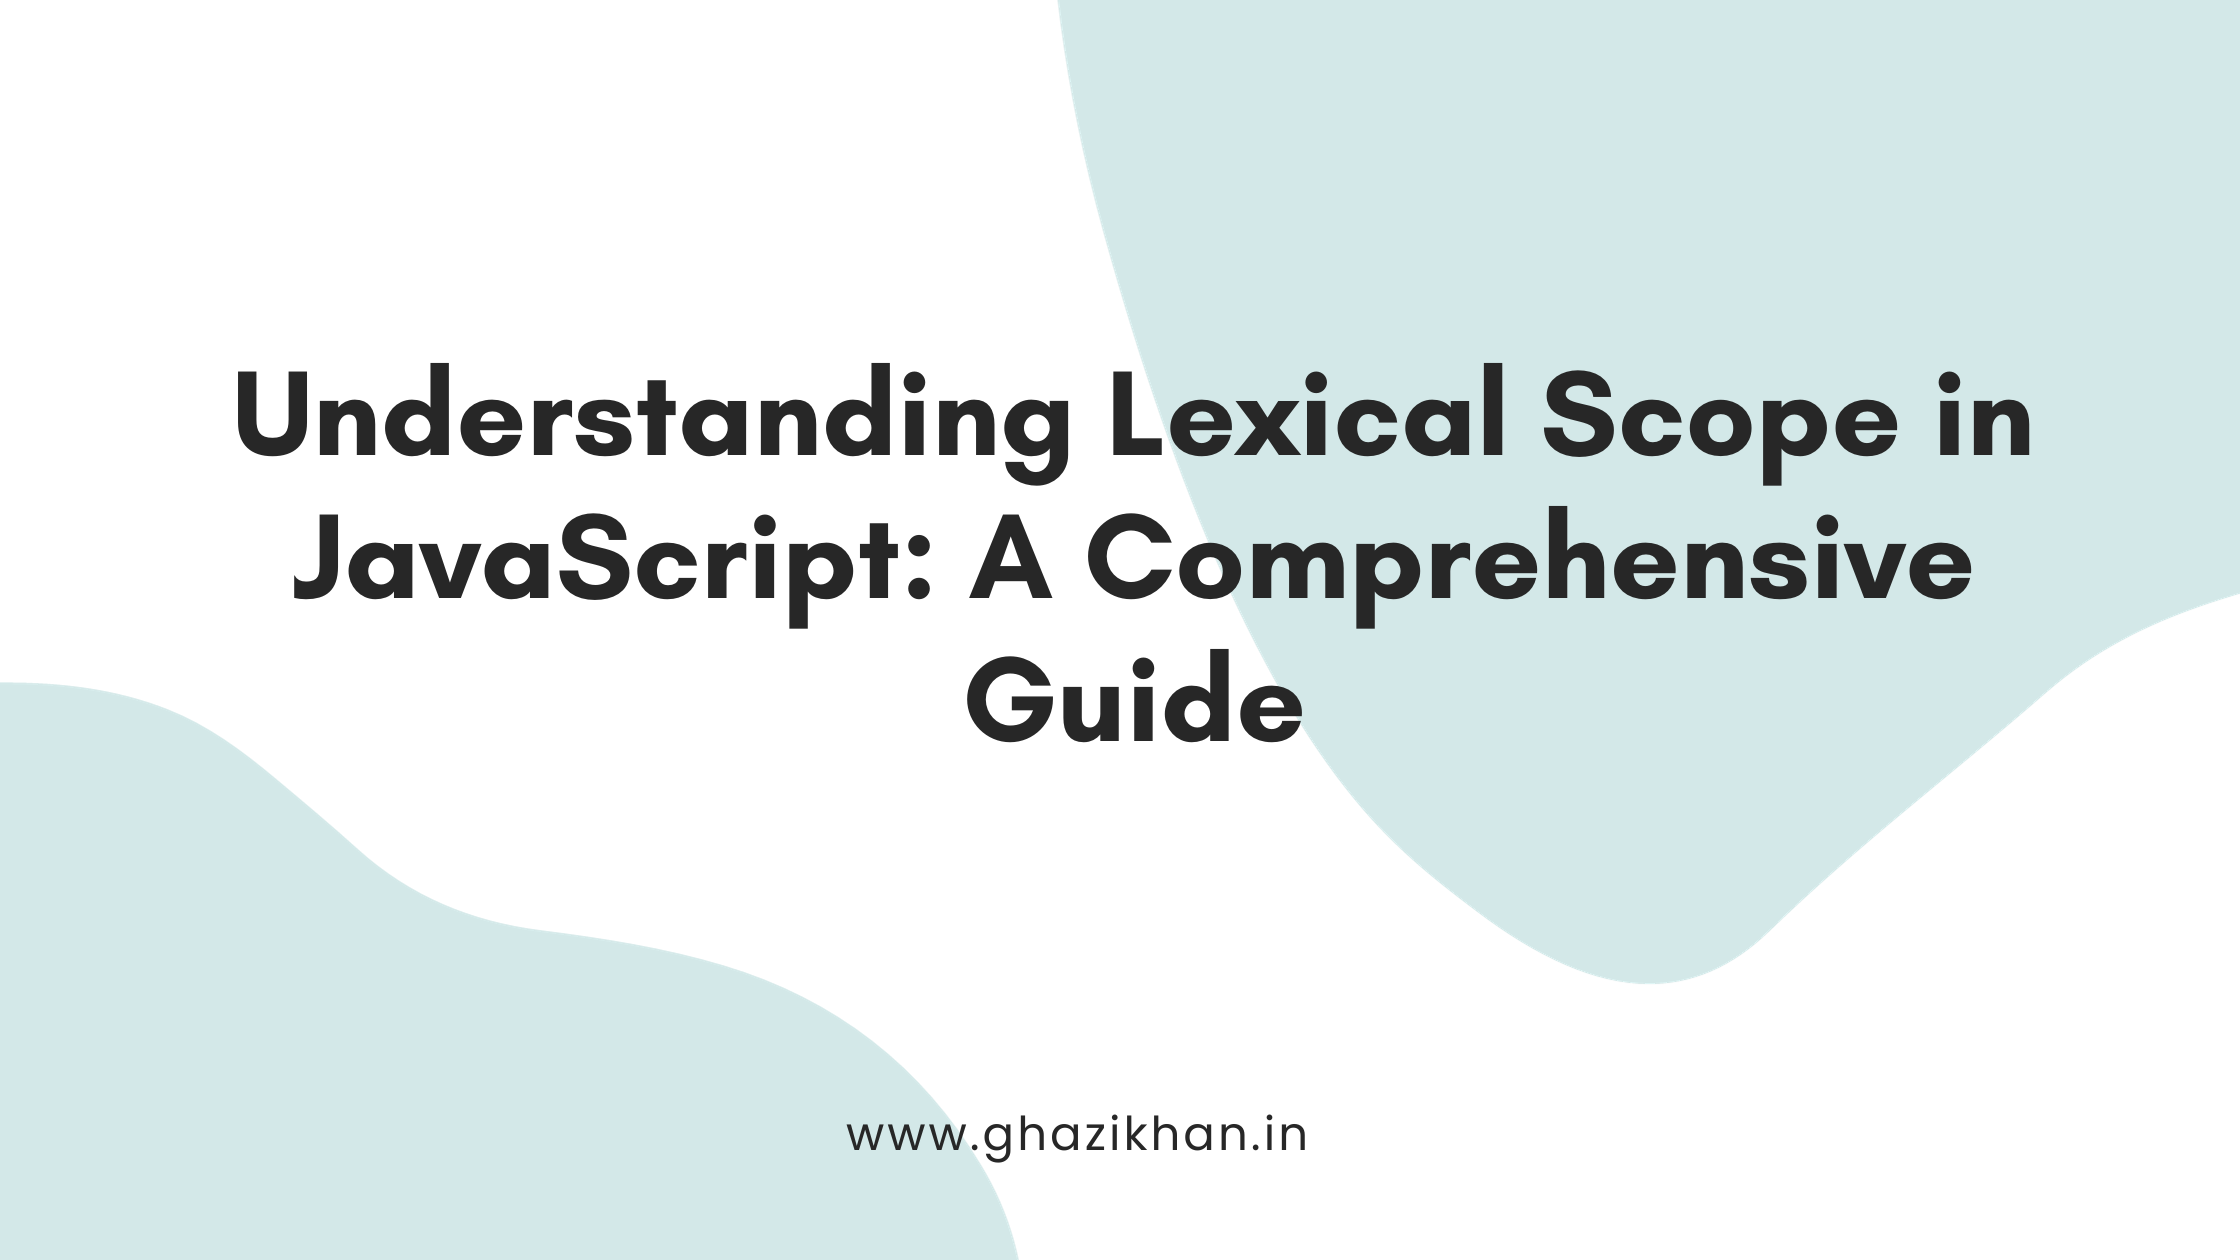 Understanding Lexical Scope in JavaScript: A Comprehensive Guide